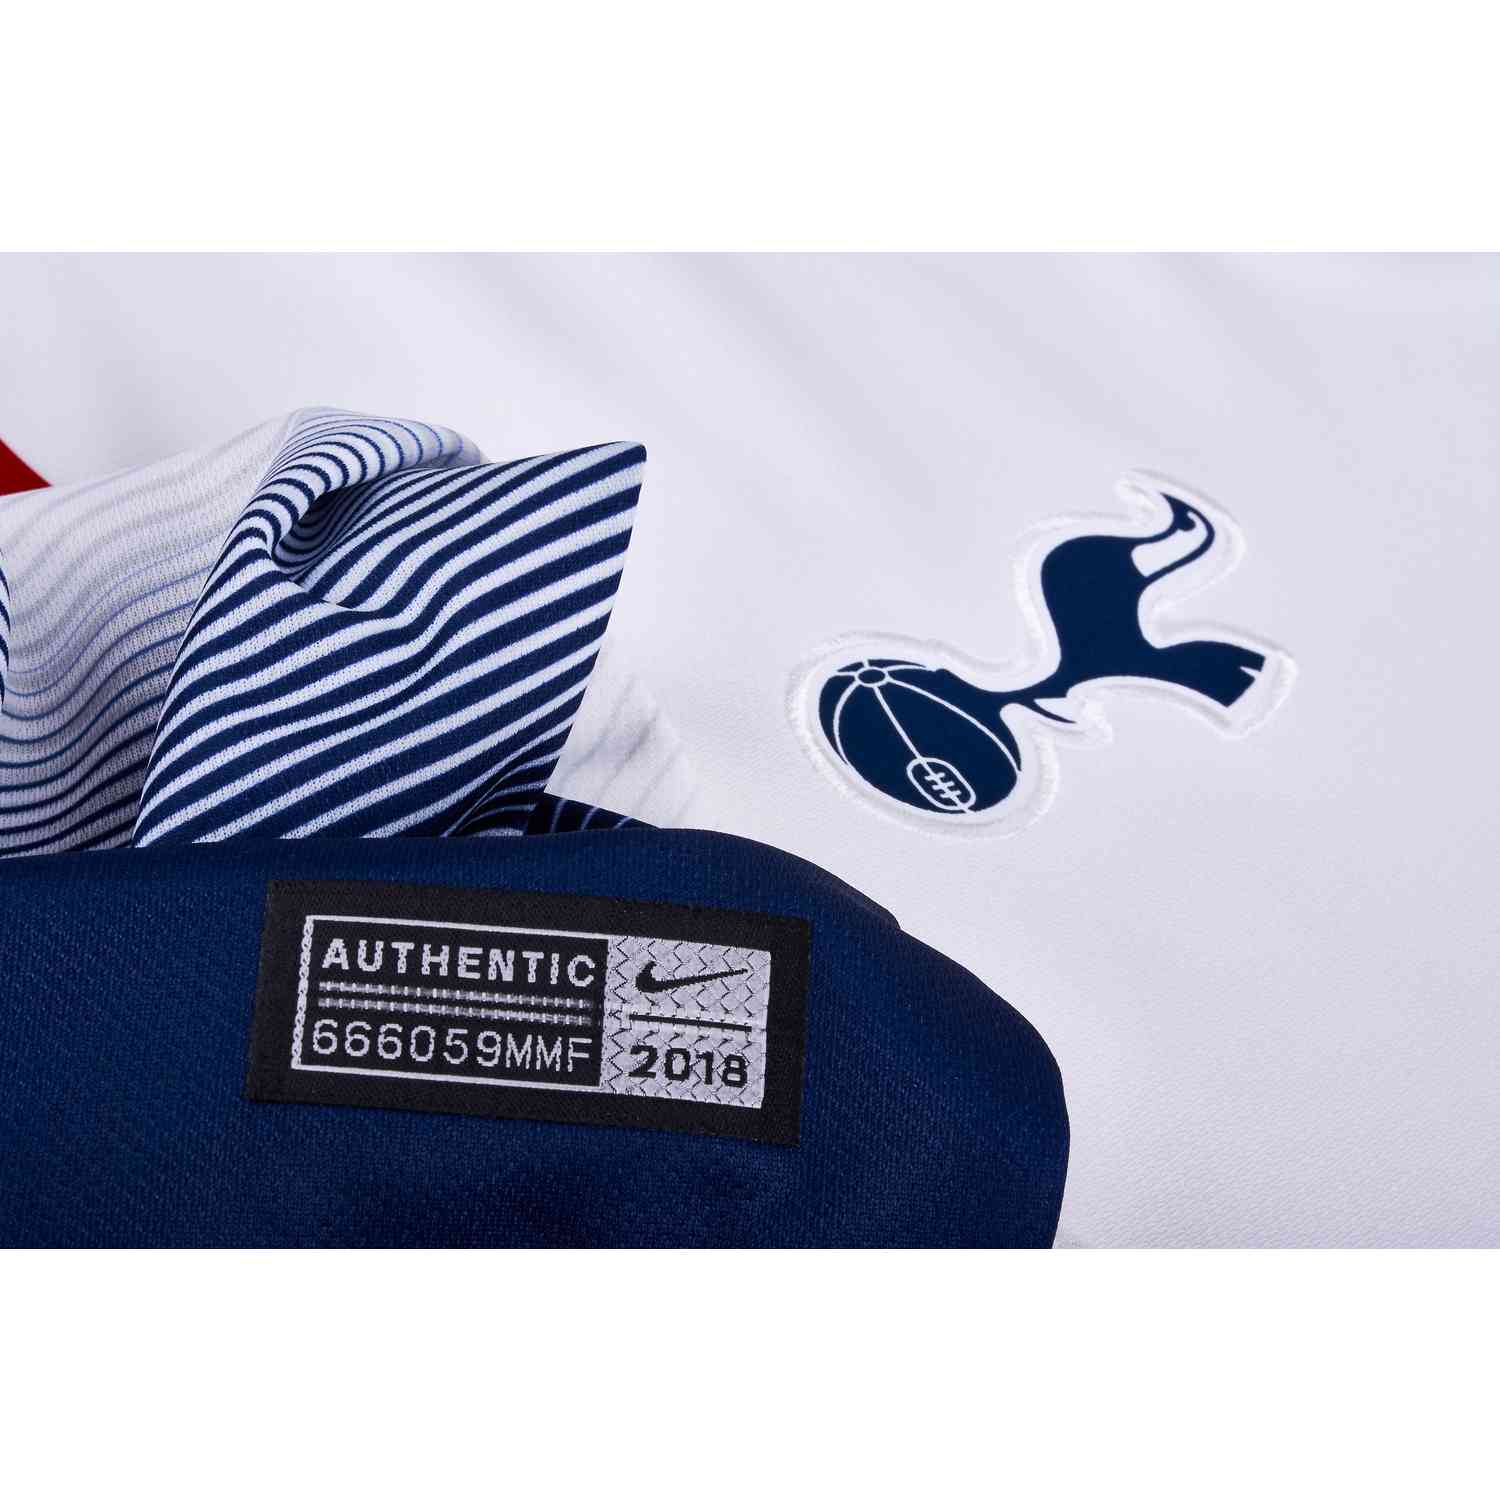 Nike Mens 2018/19 Tottenham Hotspur FC Home Long Sleeve Jersey White/Navy  Small : : Clothing & Accessories